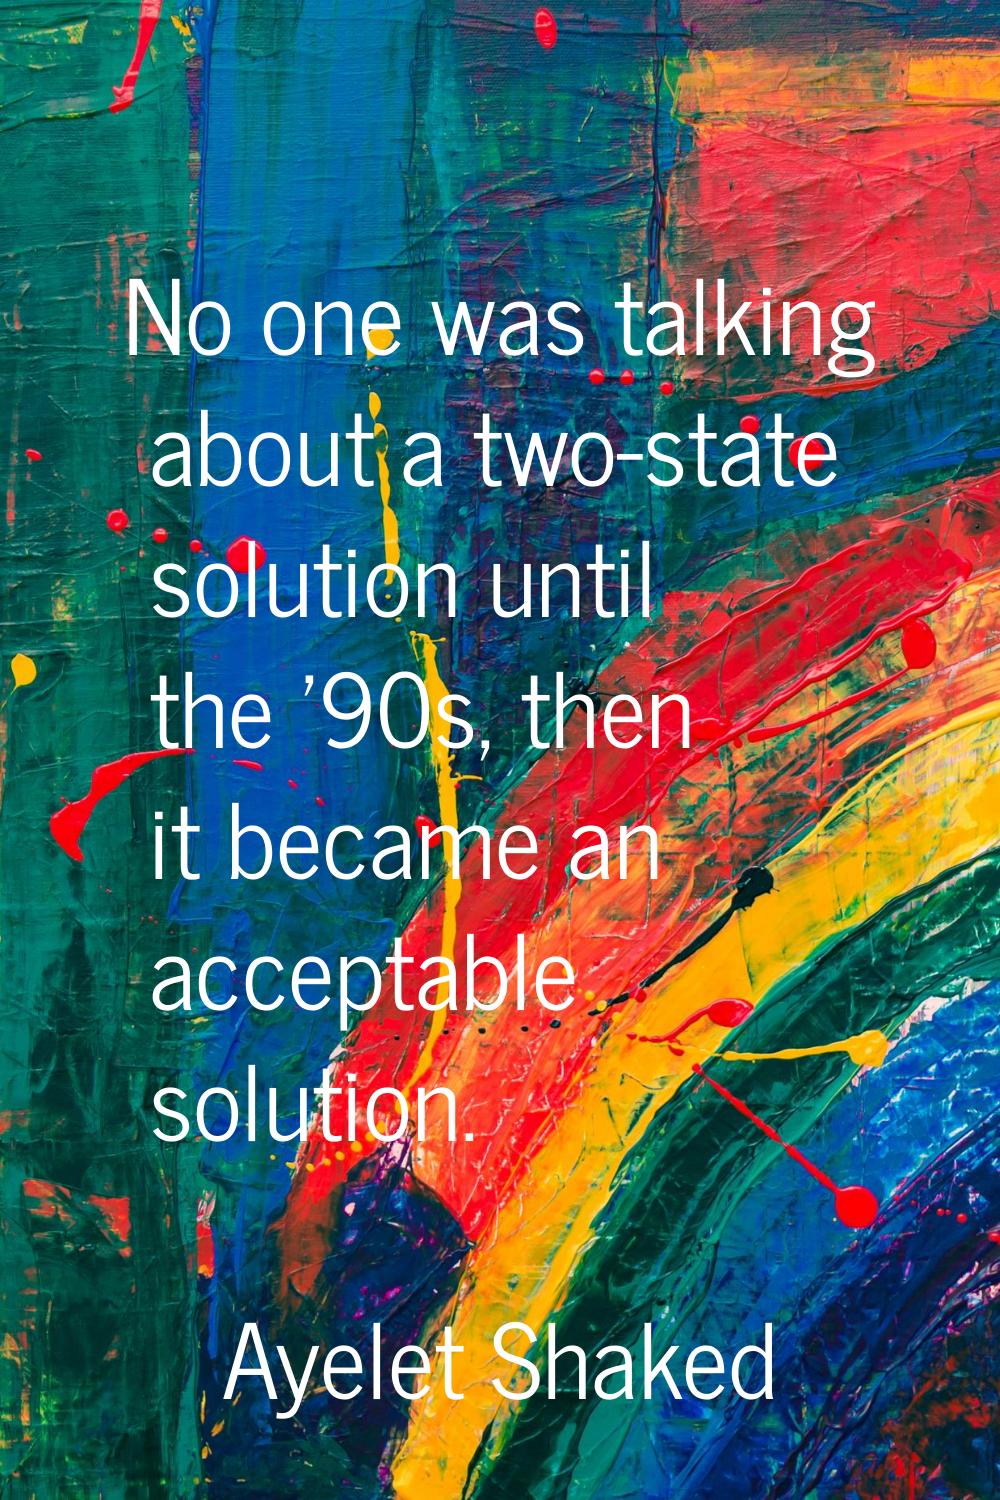 No one was talking about a two-state solution until the '90s, then it became an acceptable solution